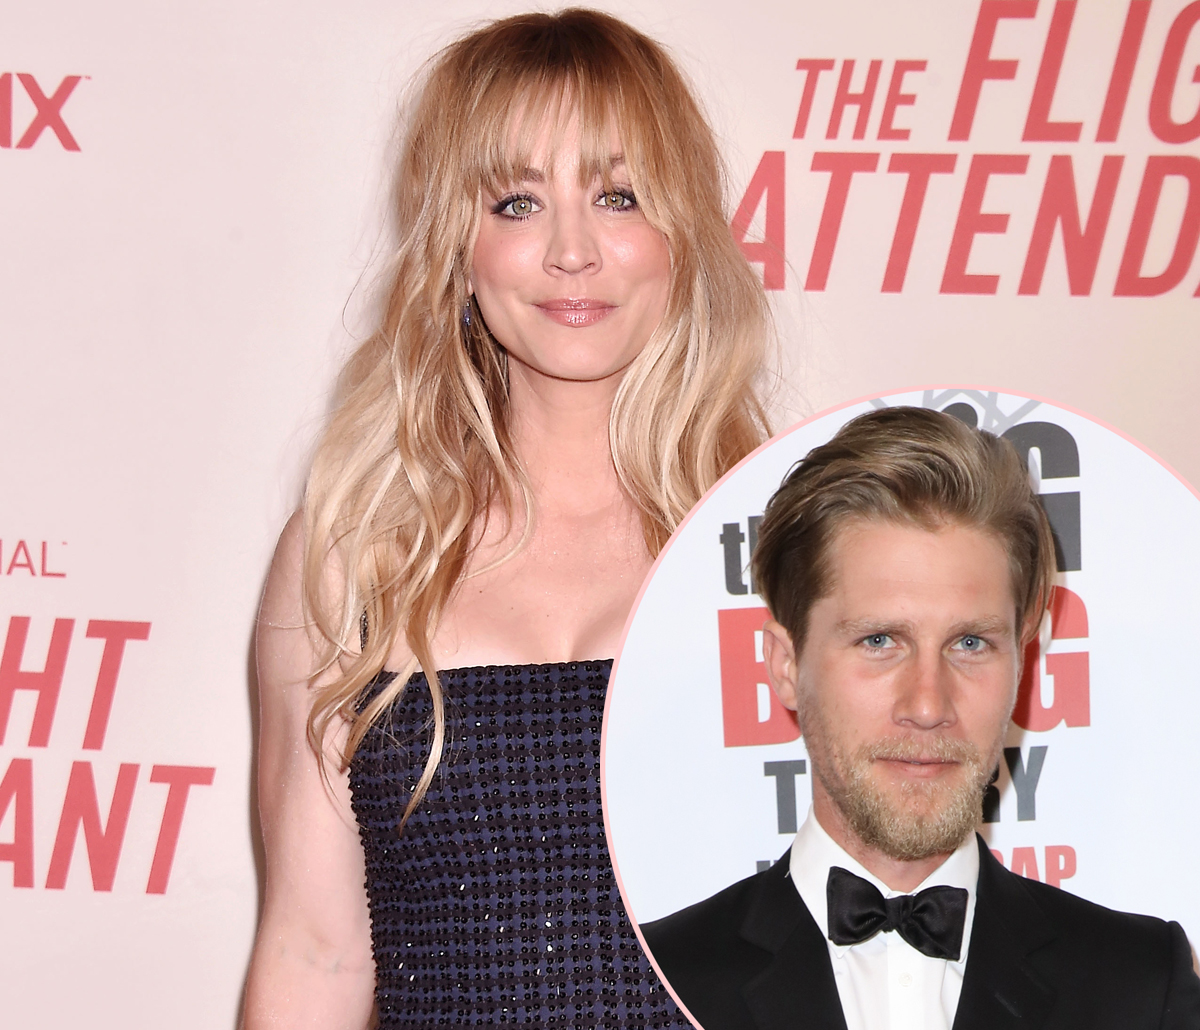 #Kaley Cuoco Says She Staged Her Own ‘Intervention’ During Karl Cook Divorce: ‘It Was Really A Super Dark Time’